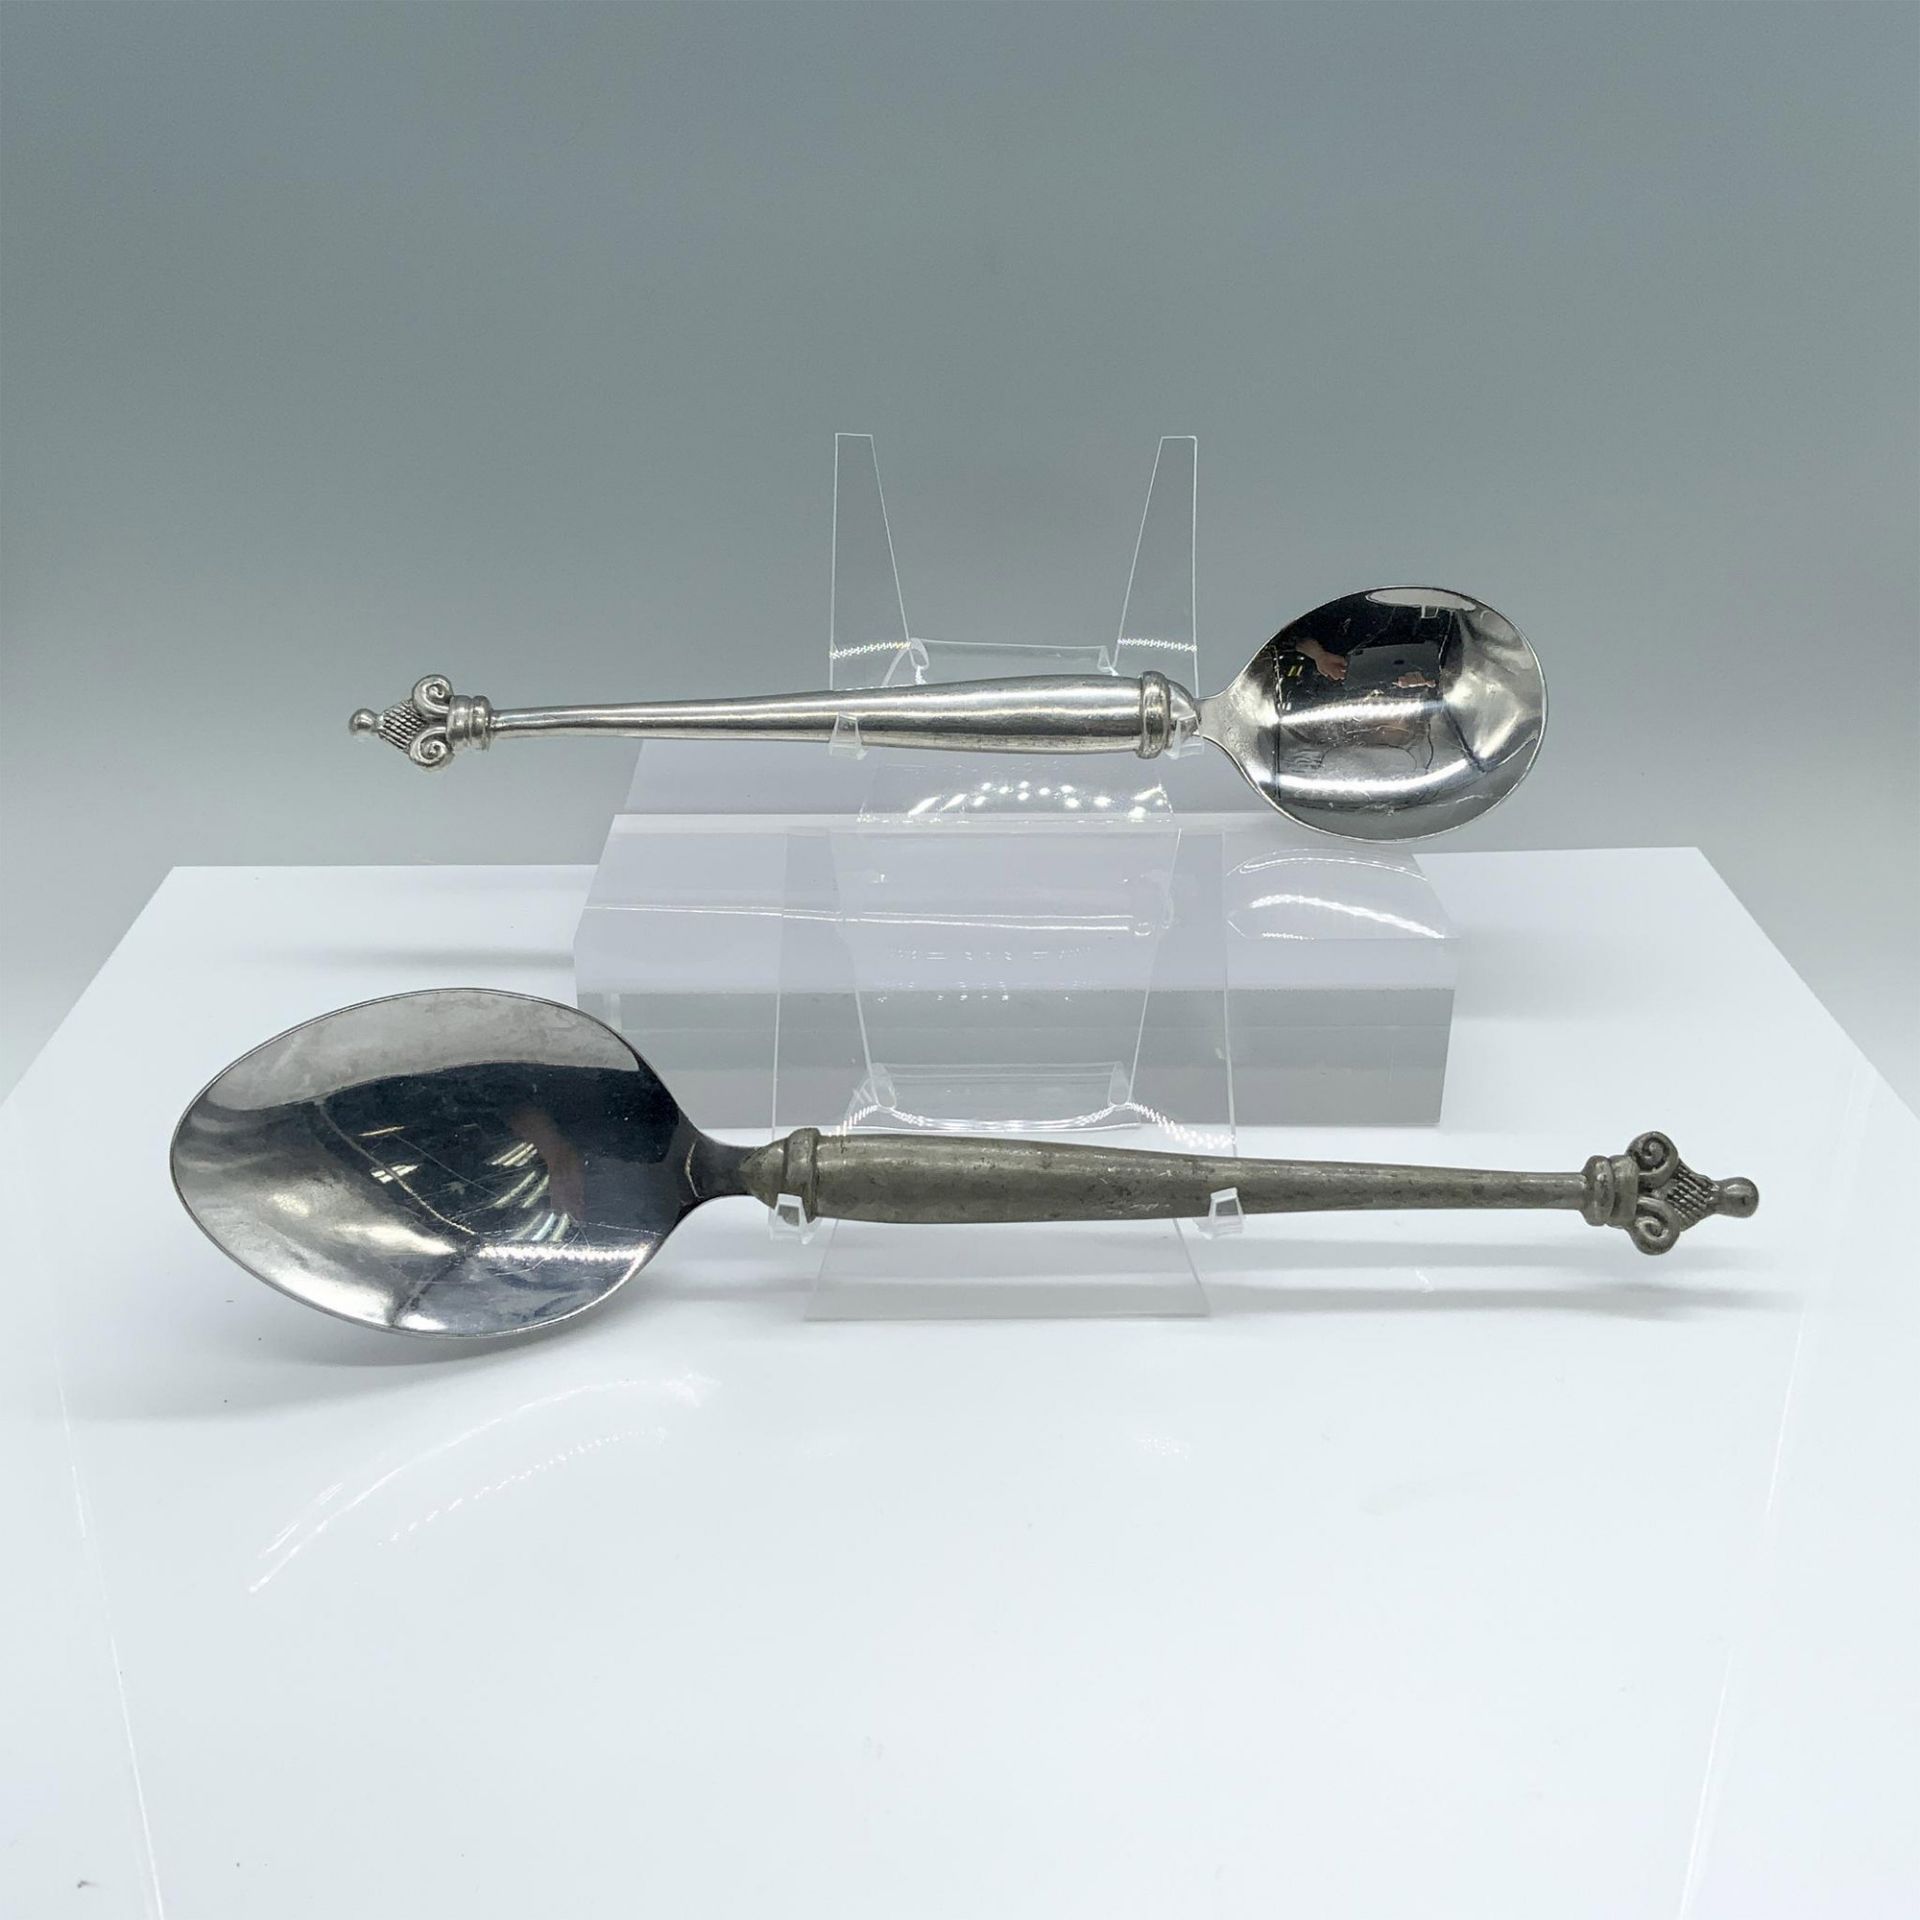 2pc Carrol Boyes Aluminum Serving Spoons - Image 2 of 3